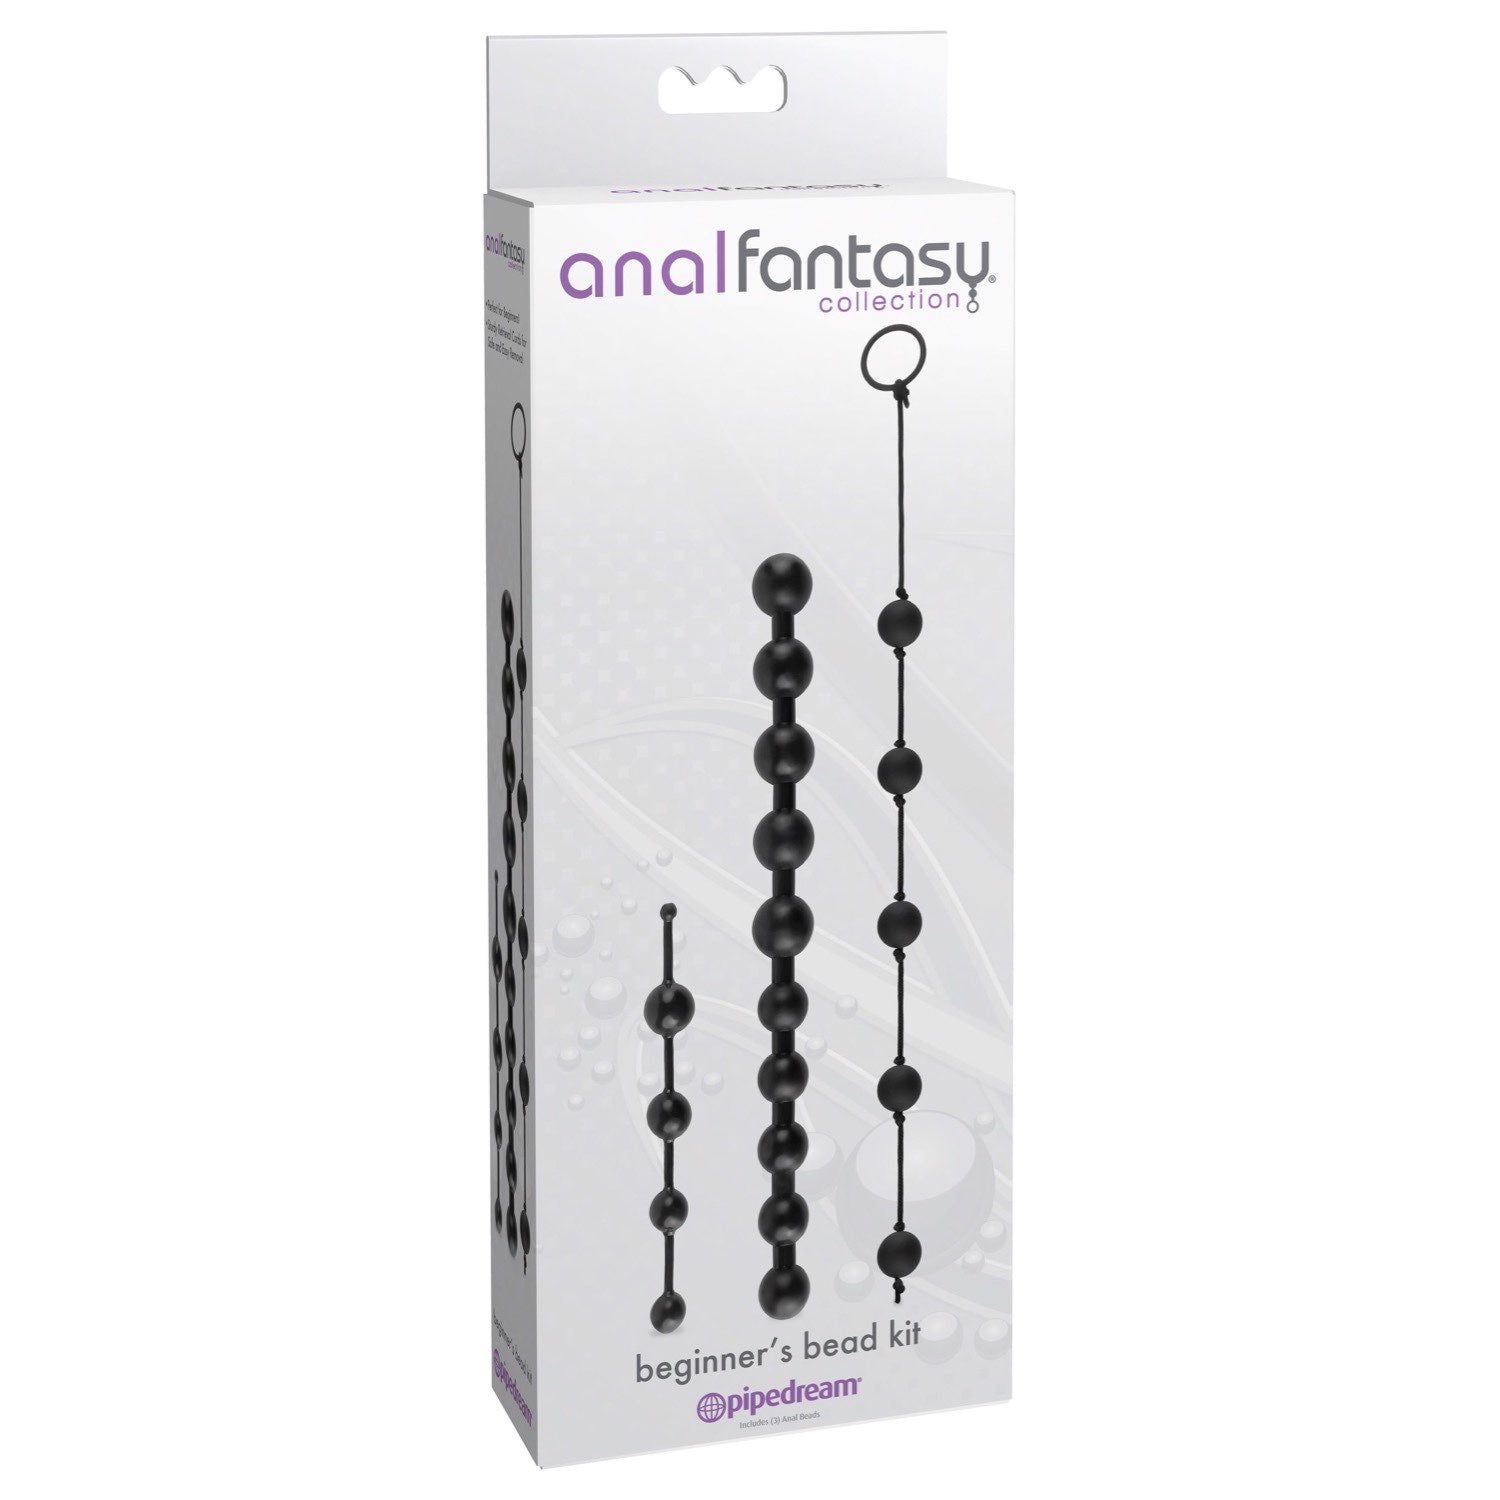 Anal Fantasy Collection Beginner&#39;s Bead Kit - Black Anal Beads - Set of 3 Cords by Pipedream